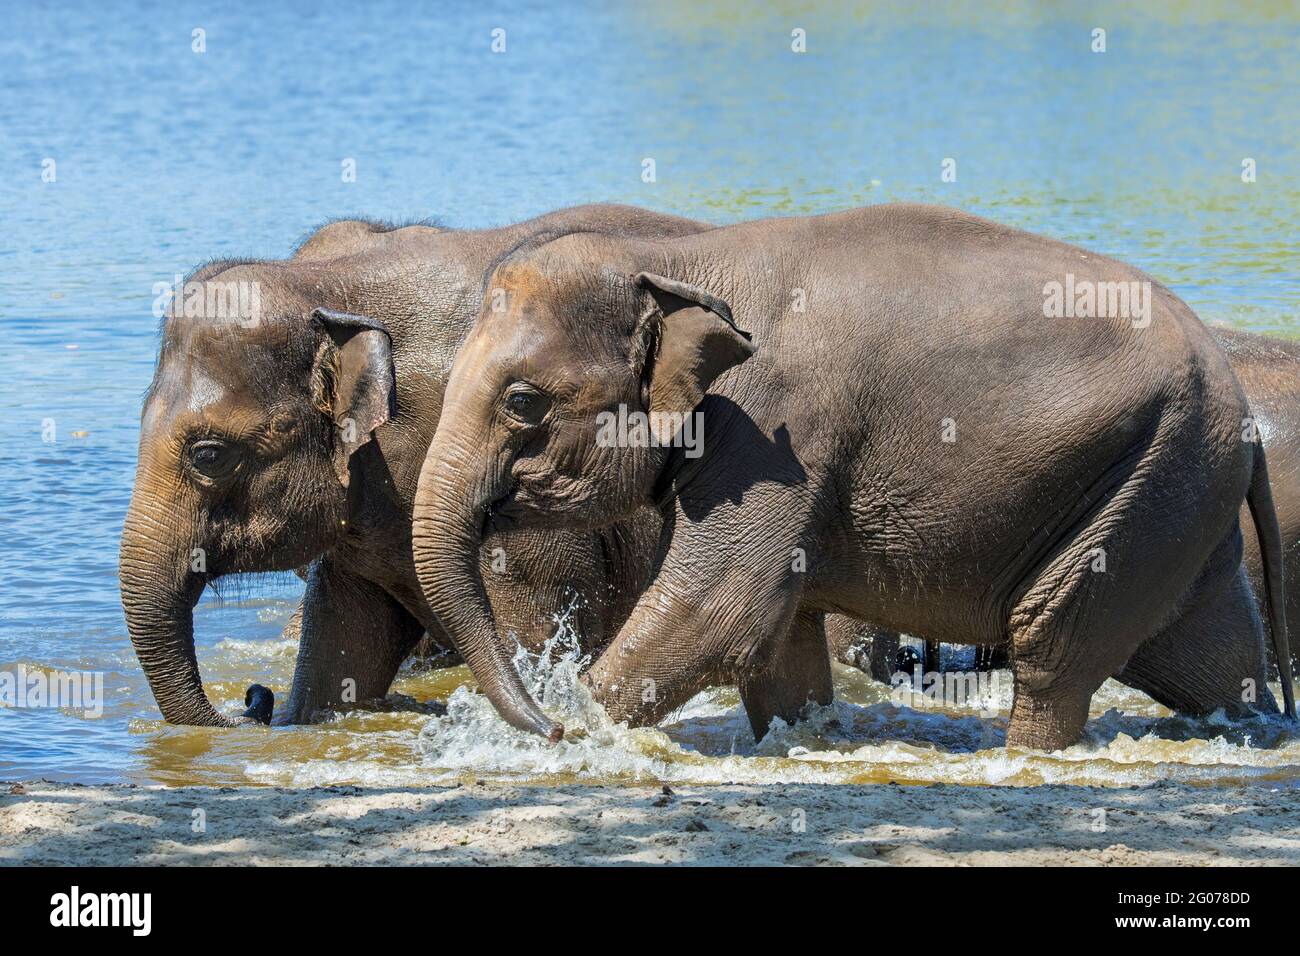 Asian elephant / Asiatic elephant (Elephas maximus) herd of juveniles and cows / females bathing in river Stock Photo